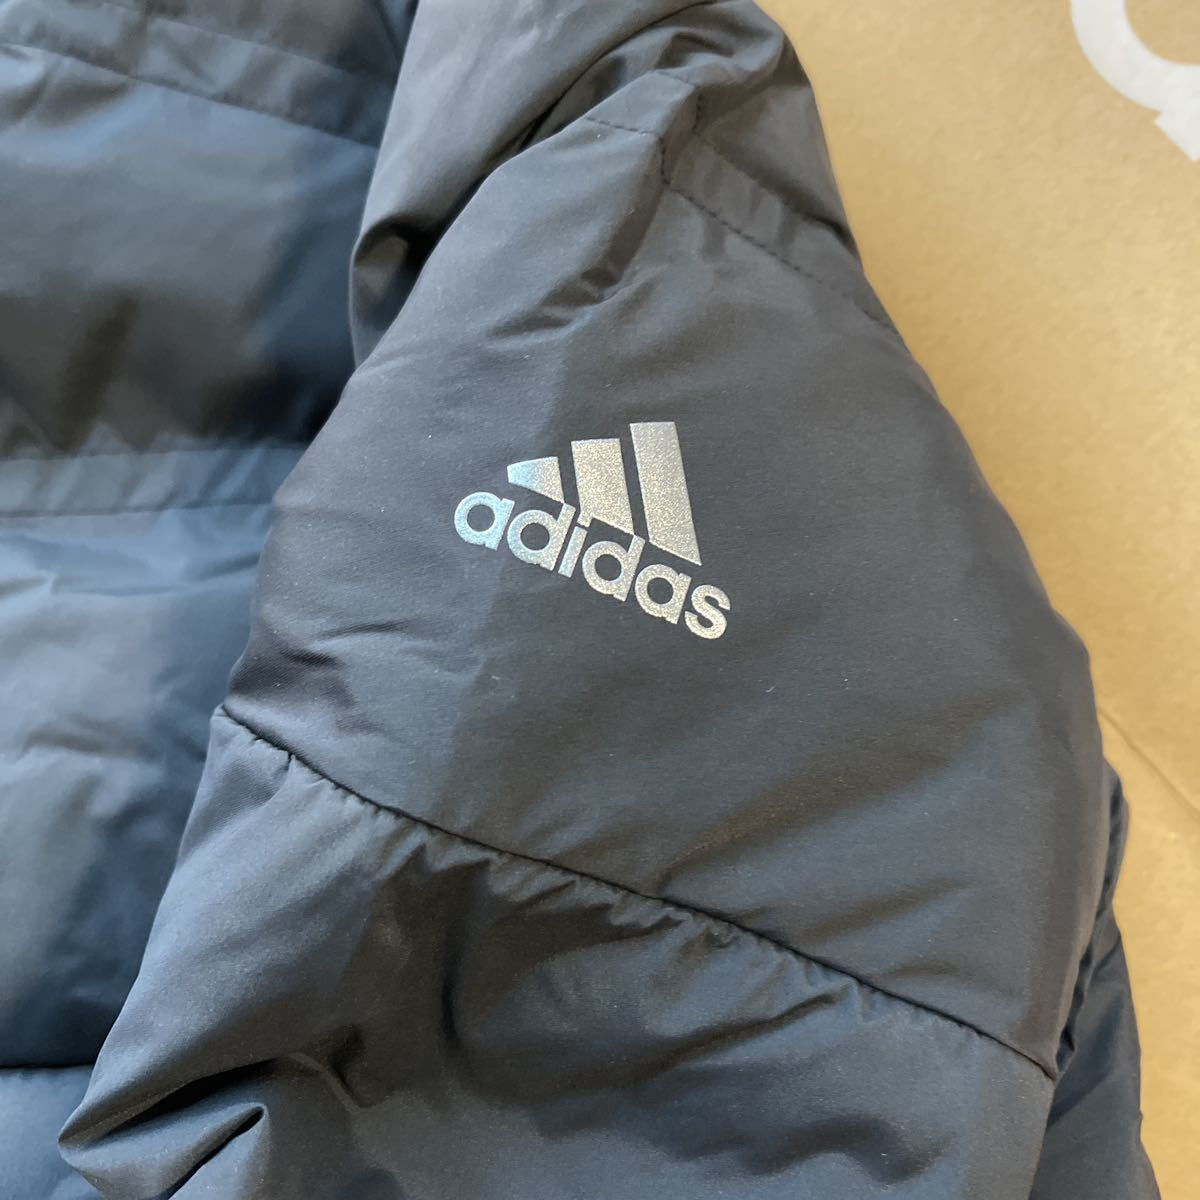  free shipping adidas GOLF Adidas WOMENS cotton inside down 90% jacket waterproof protection against cold heat insulation swing easy STRETCH ventilation ventilation lustre 3stripe( great special price M) new goods 